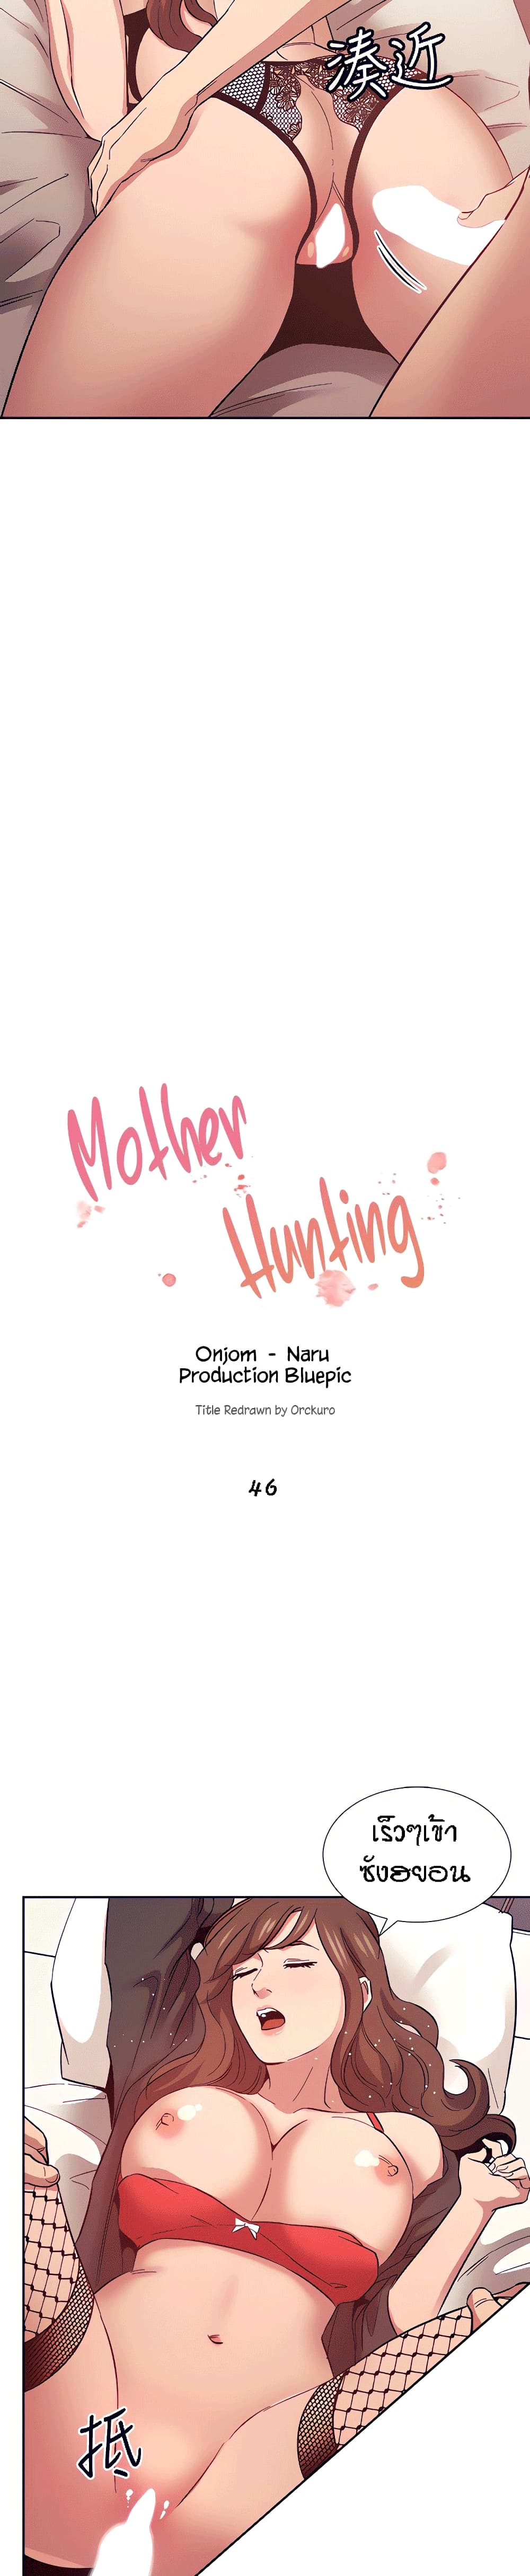 Mother Hunting 46 05